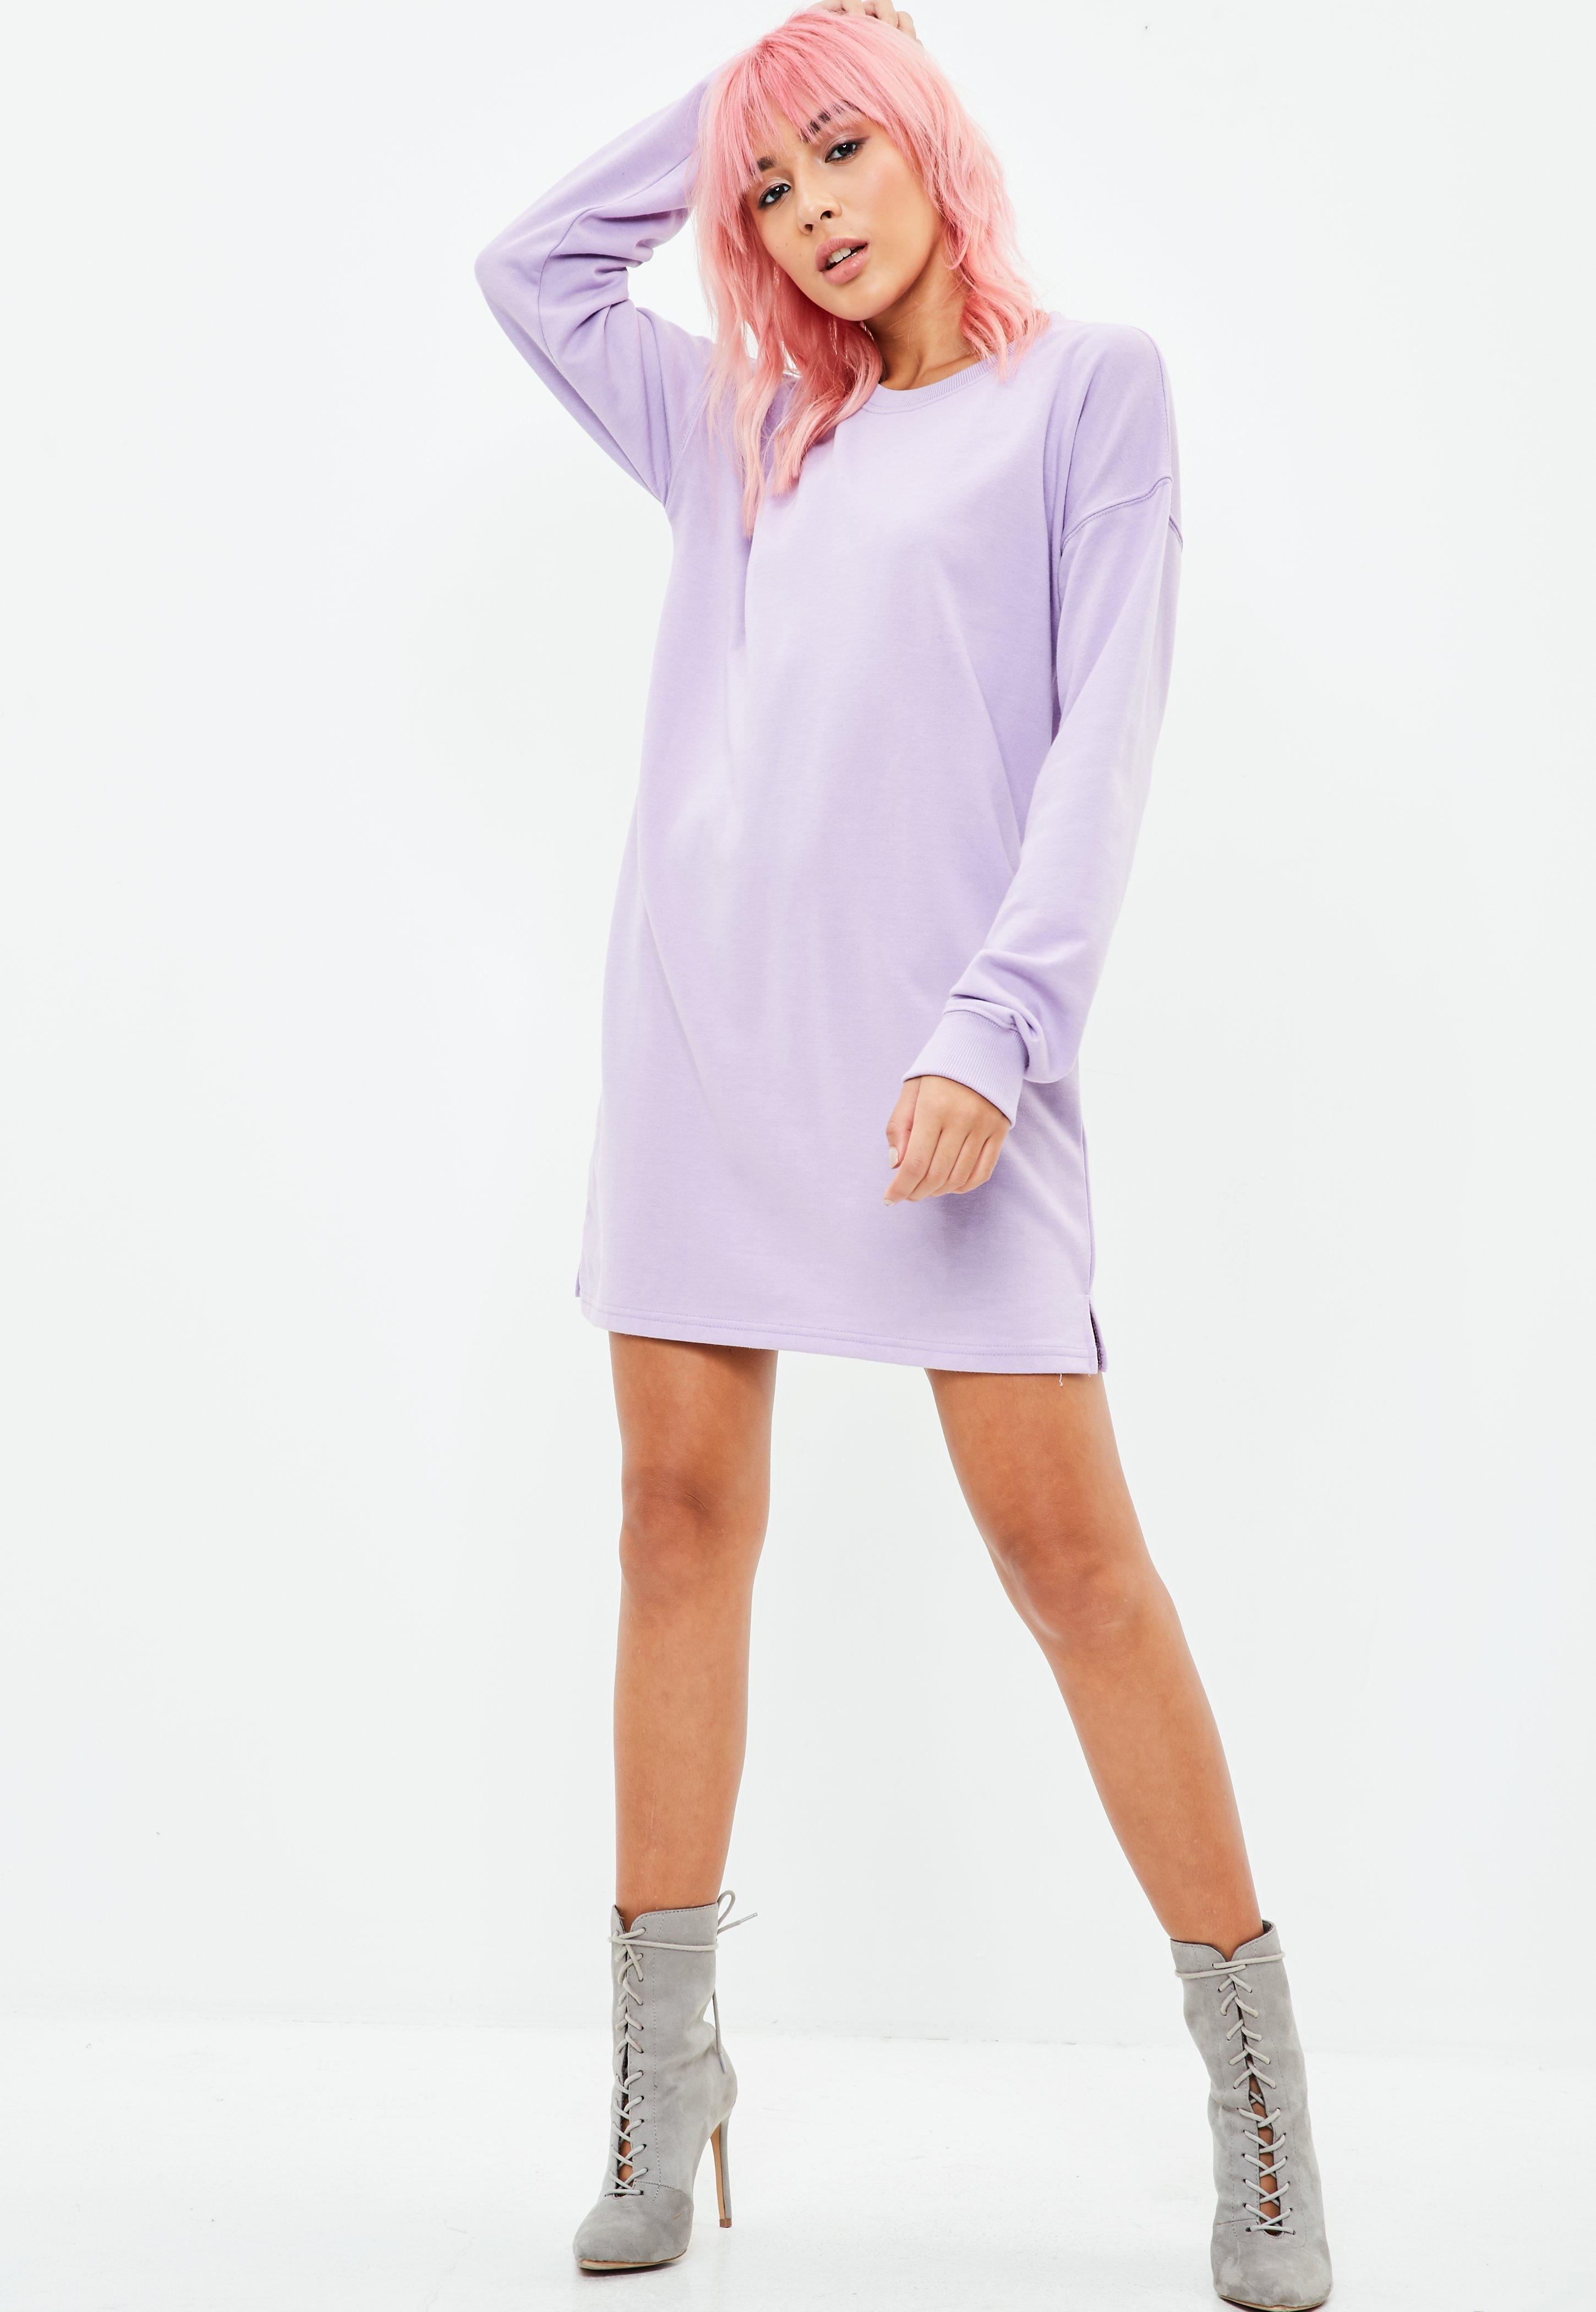 Lyst - Missguided Lilac Long Sleeve Sweater Dress in Purple